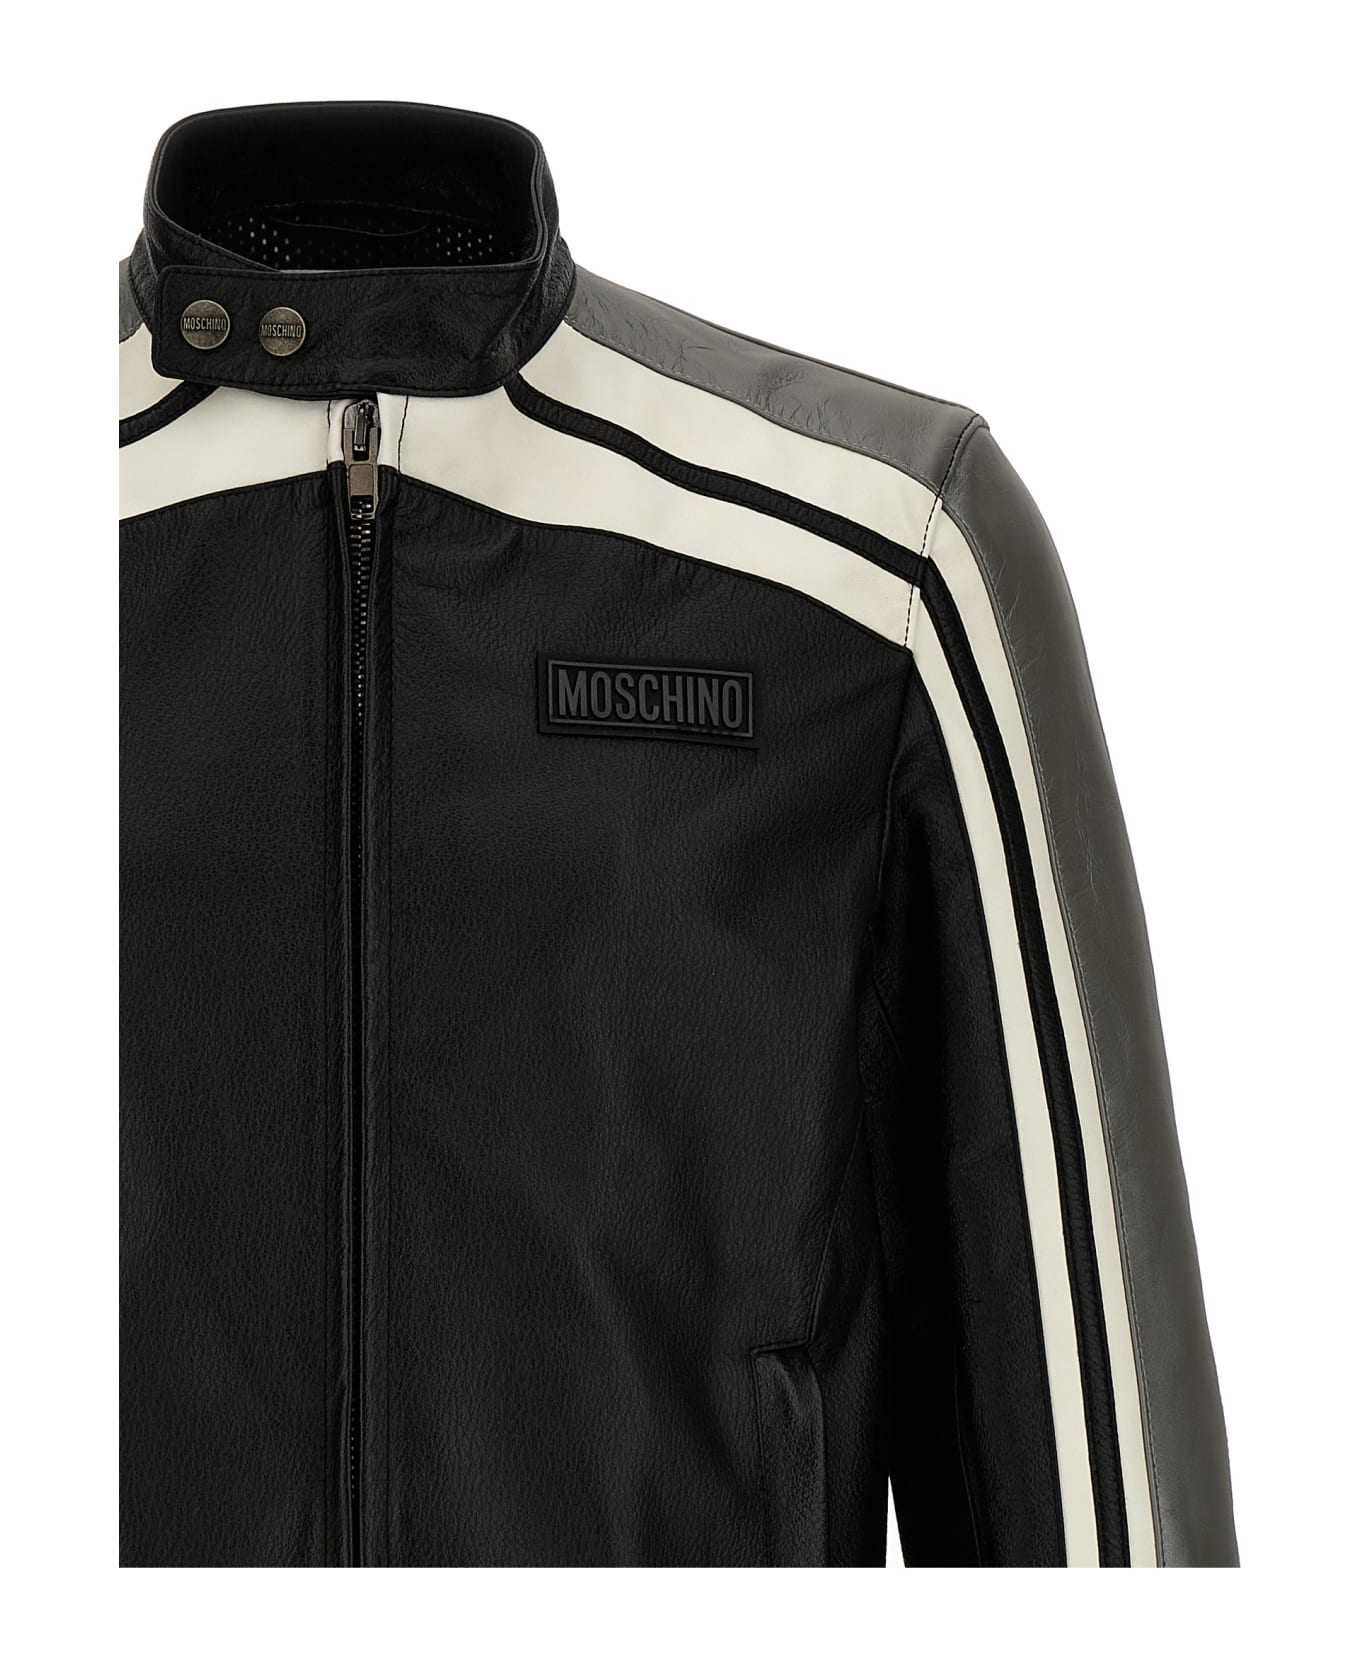 Moschino Leather Jacket With Contrasting Bands - Black   ジャケット